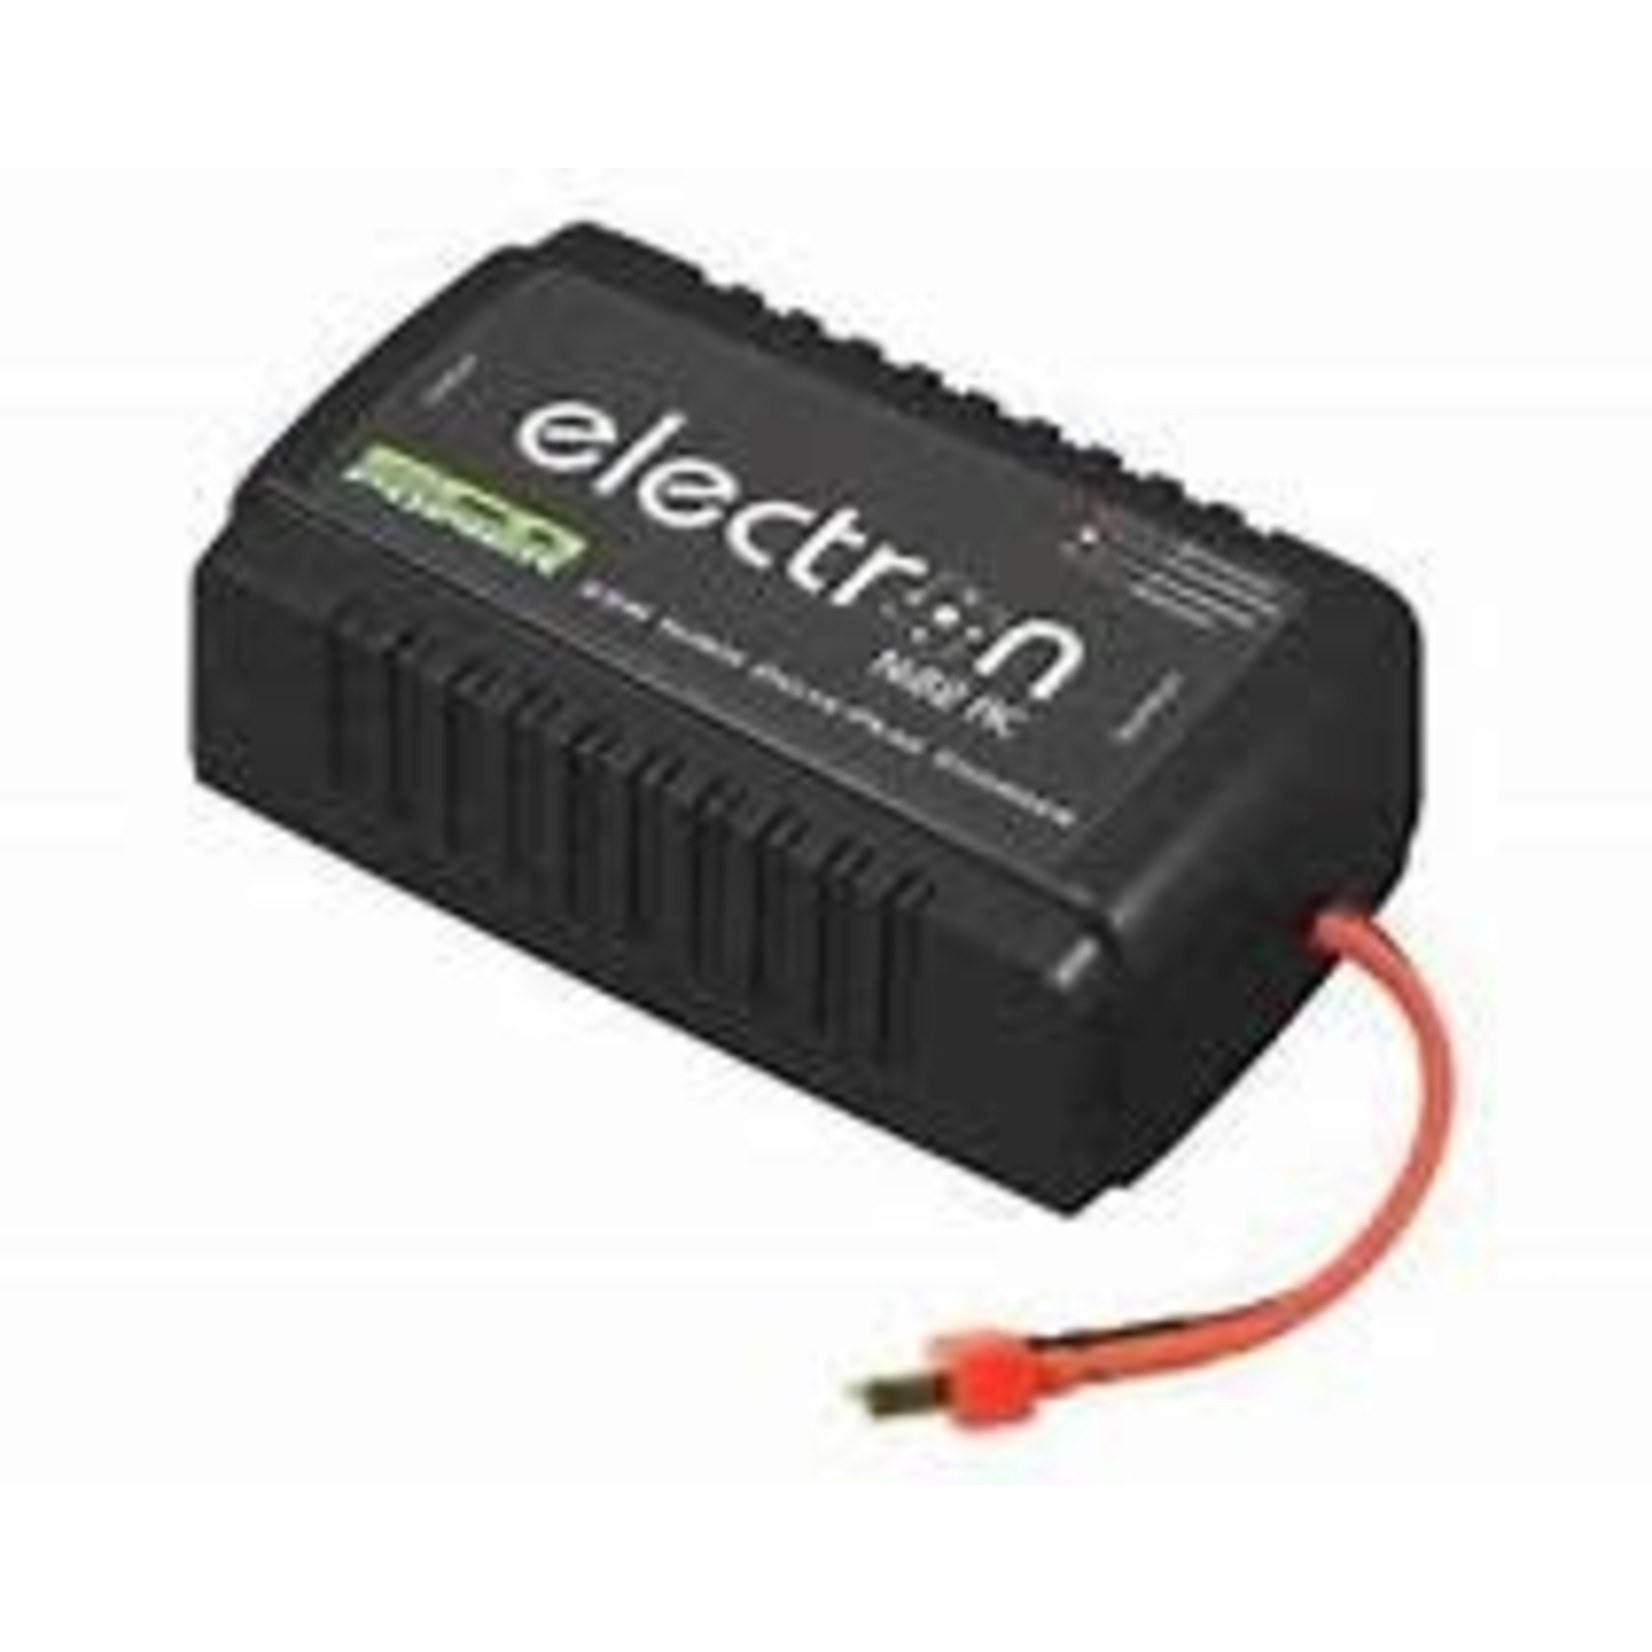 EcoPower ECP-1003 **EcoPower "Electron Ni82 AC" NiMH/NiCd Battery Charger (1-8 Cells/2A/25W)